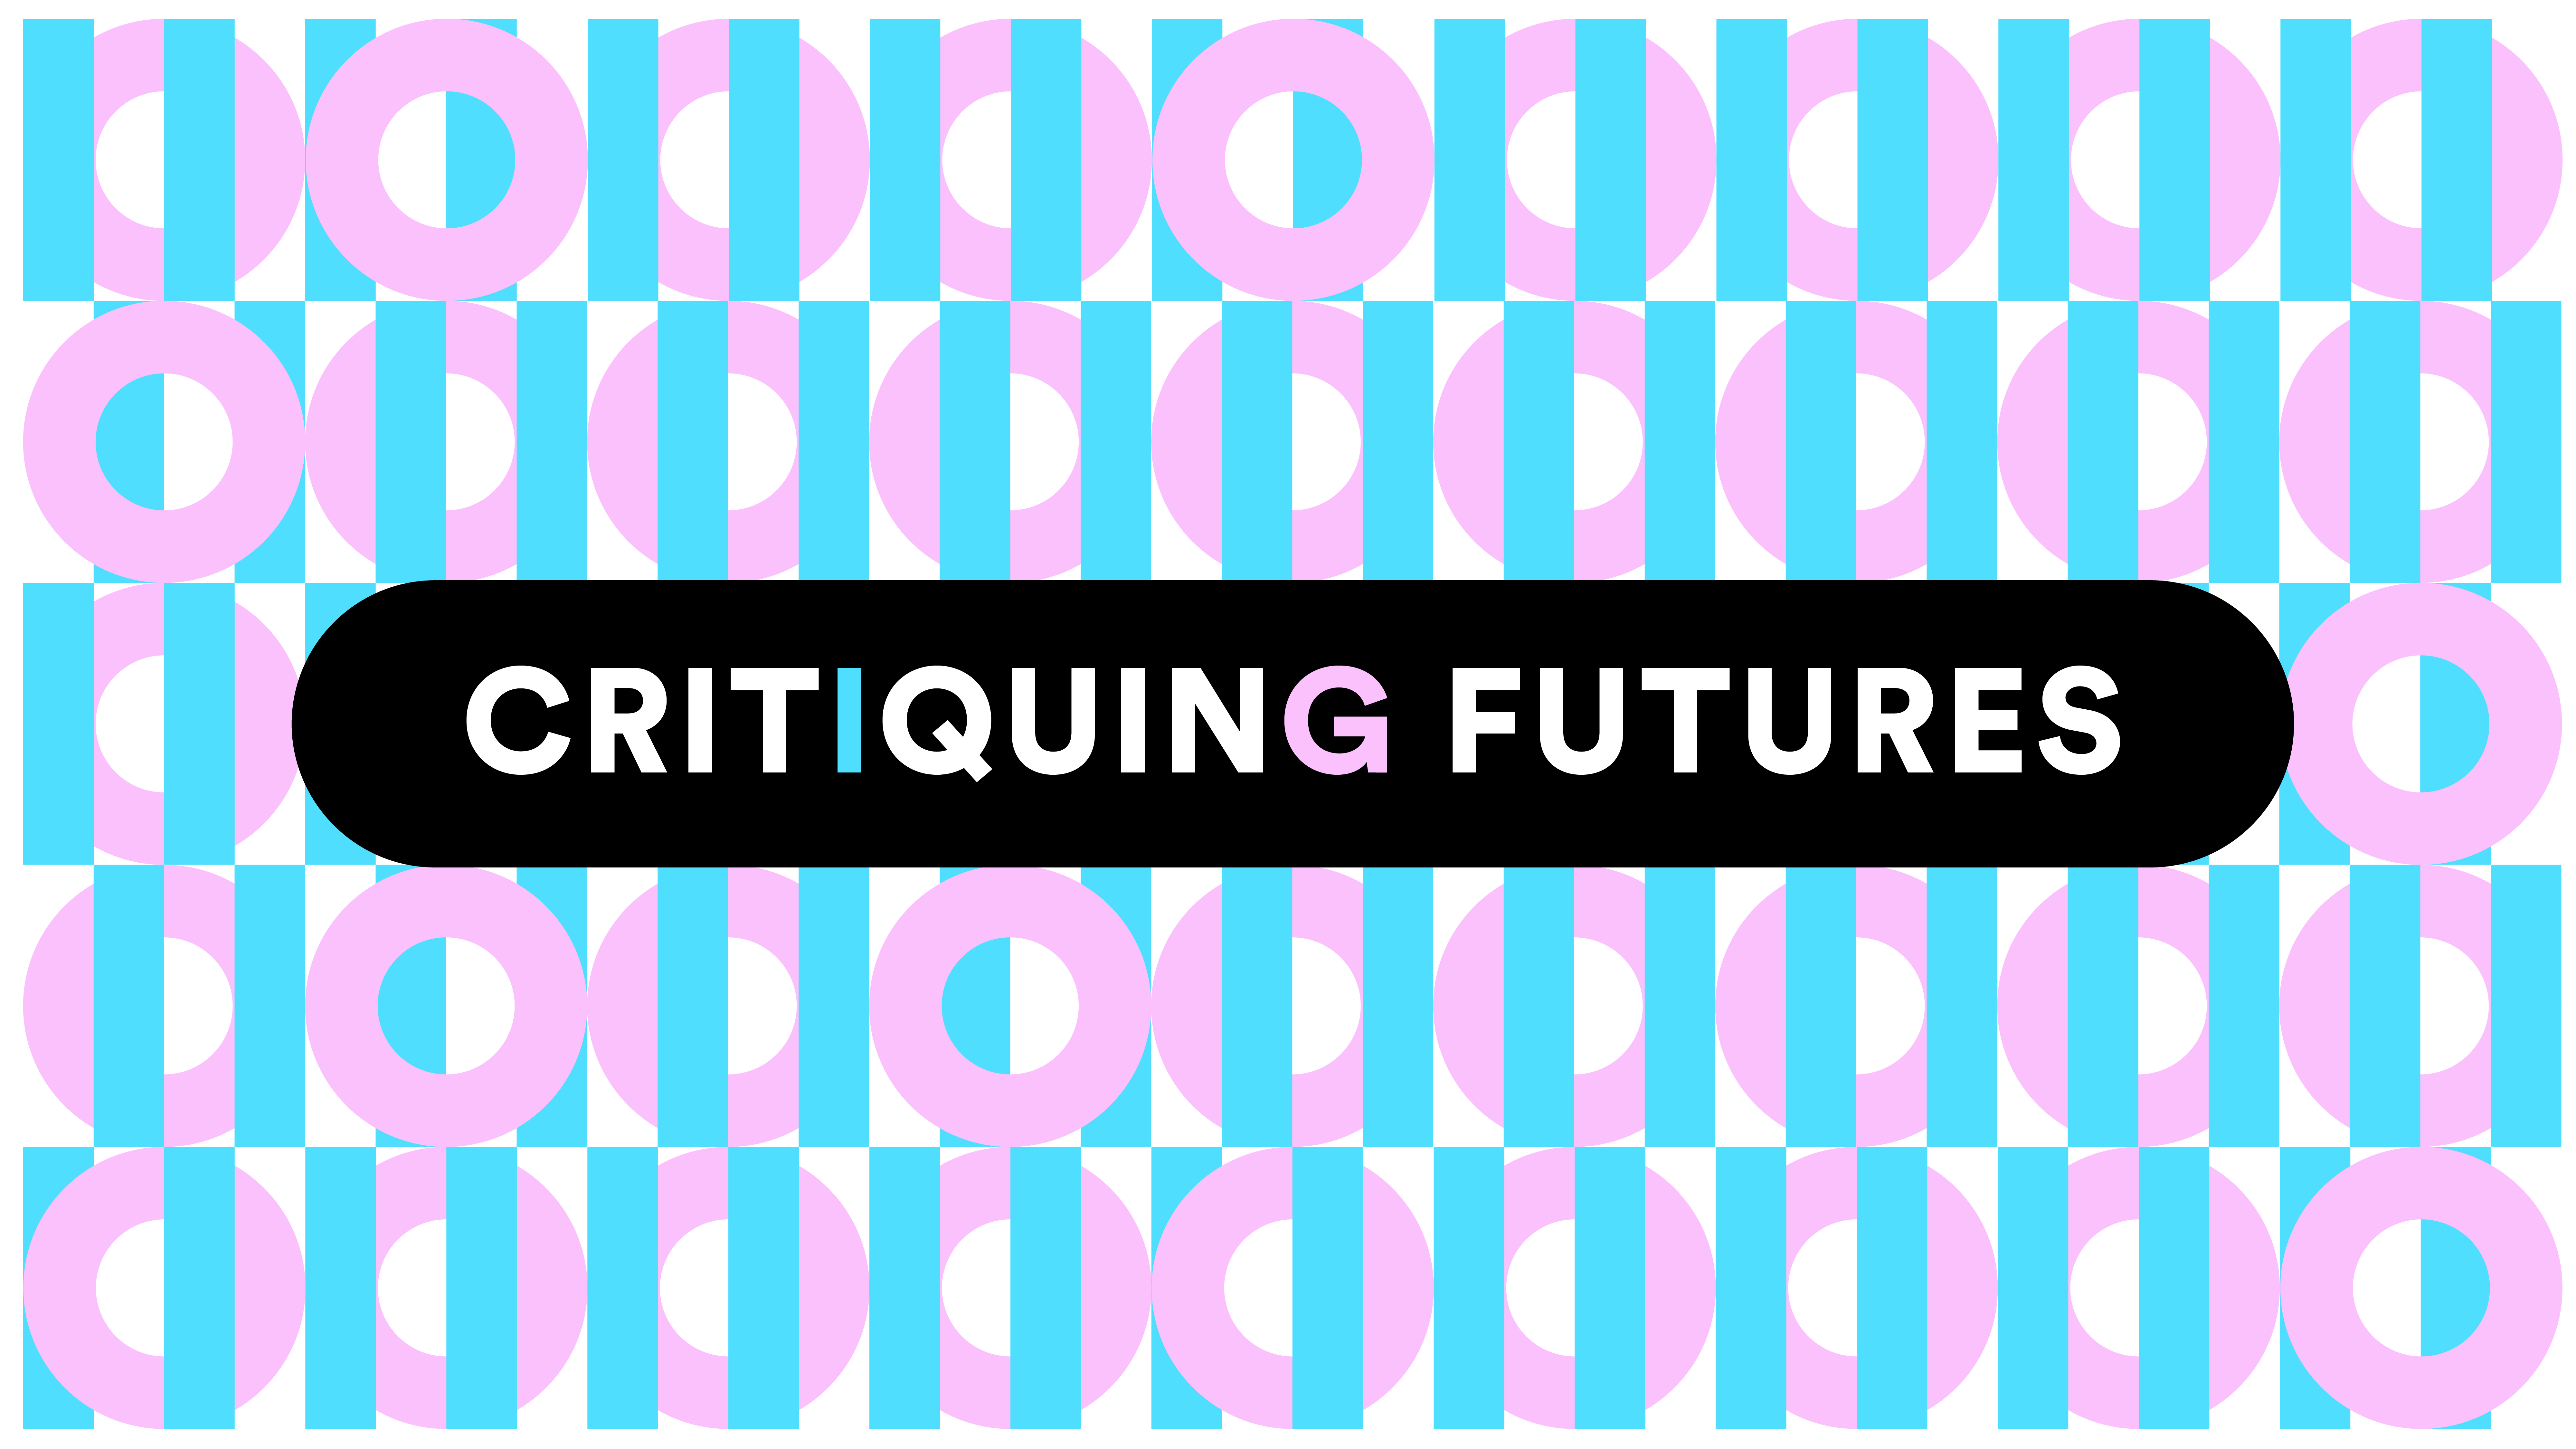 A colorful pattern of turqoise and pink shapes, with the headline Critiquing Futures written over it.